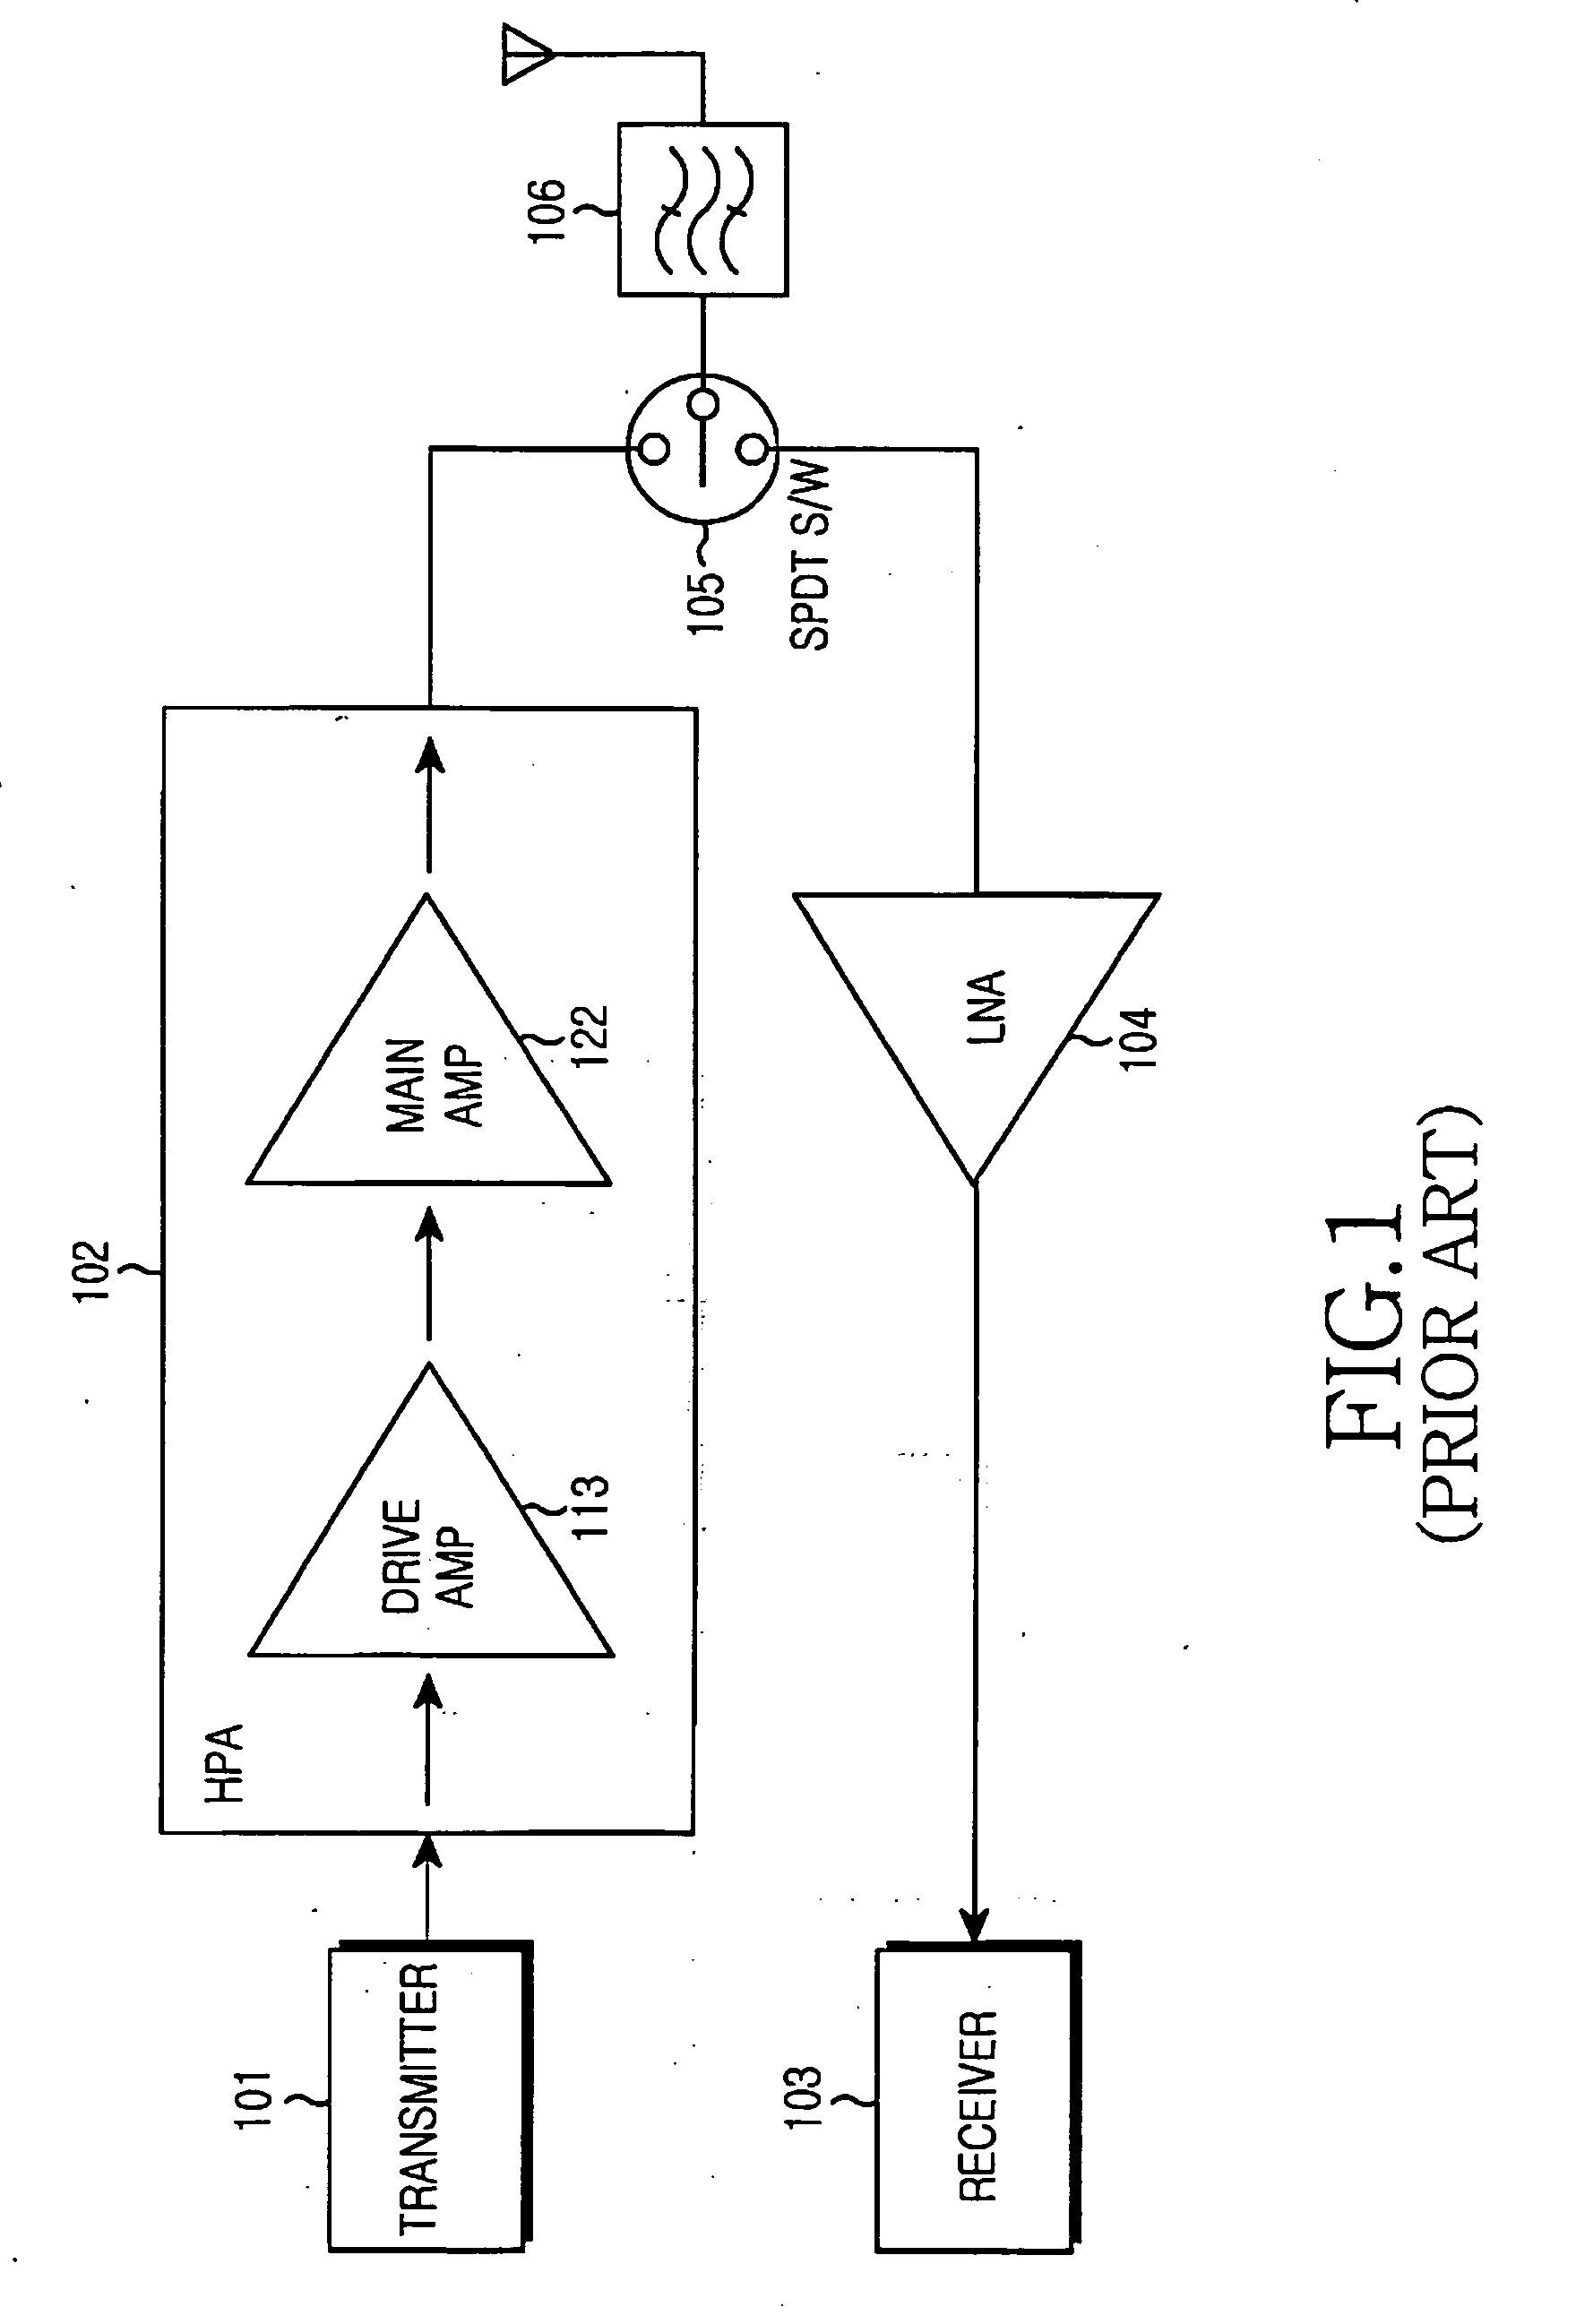 High-power amplifier apparatus for TDD wireless communication system